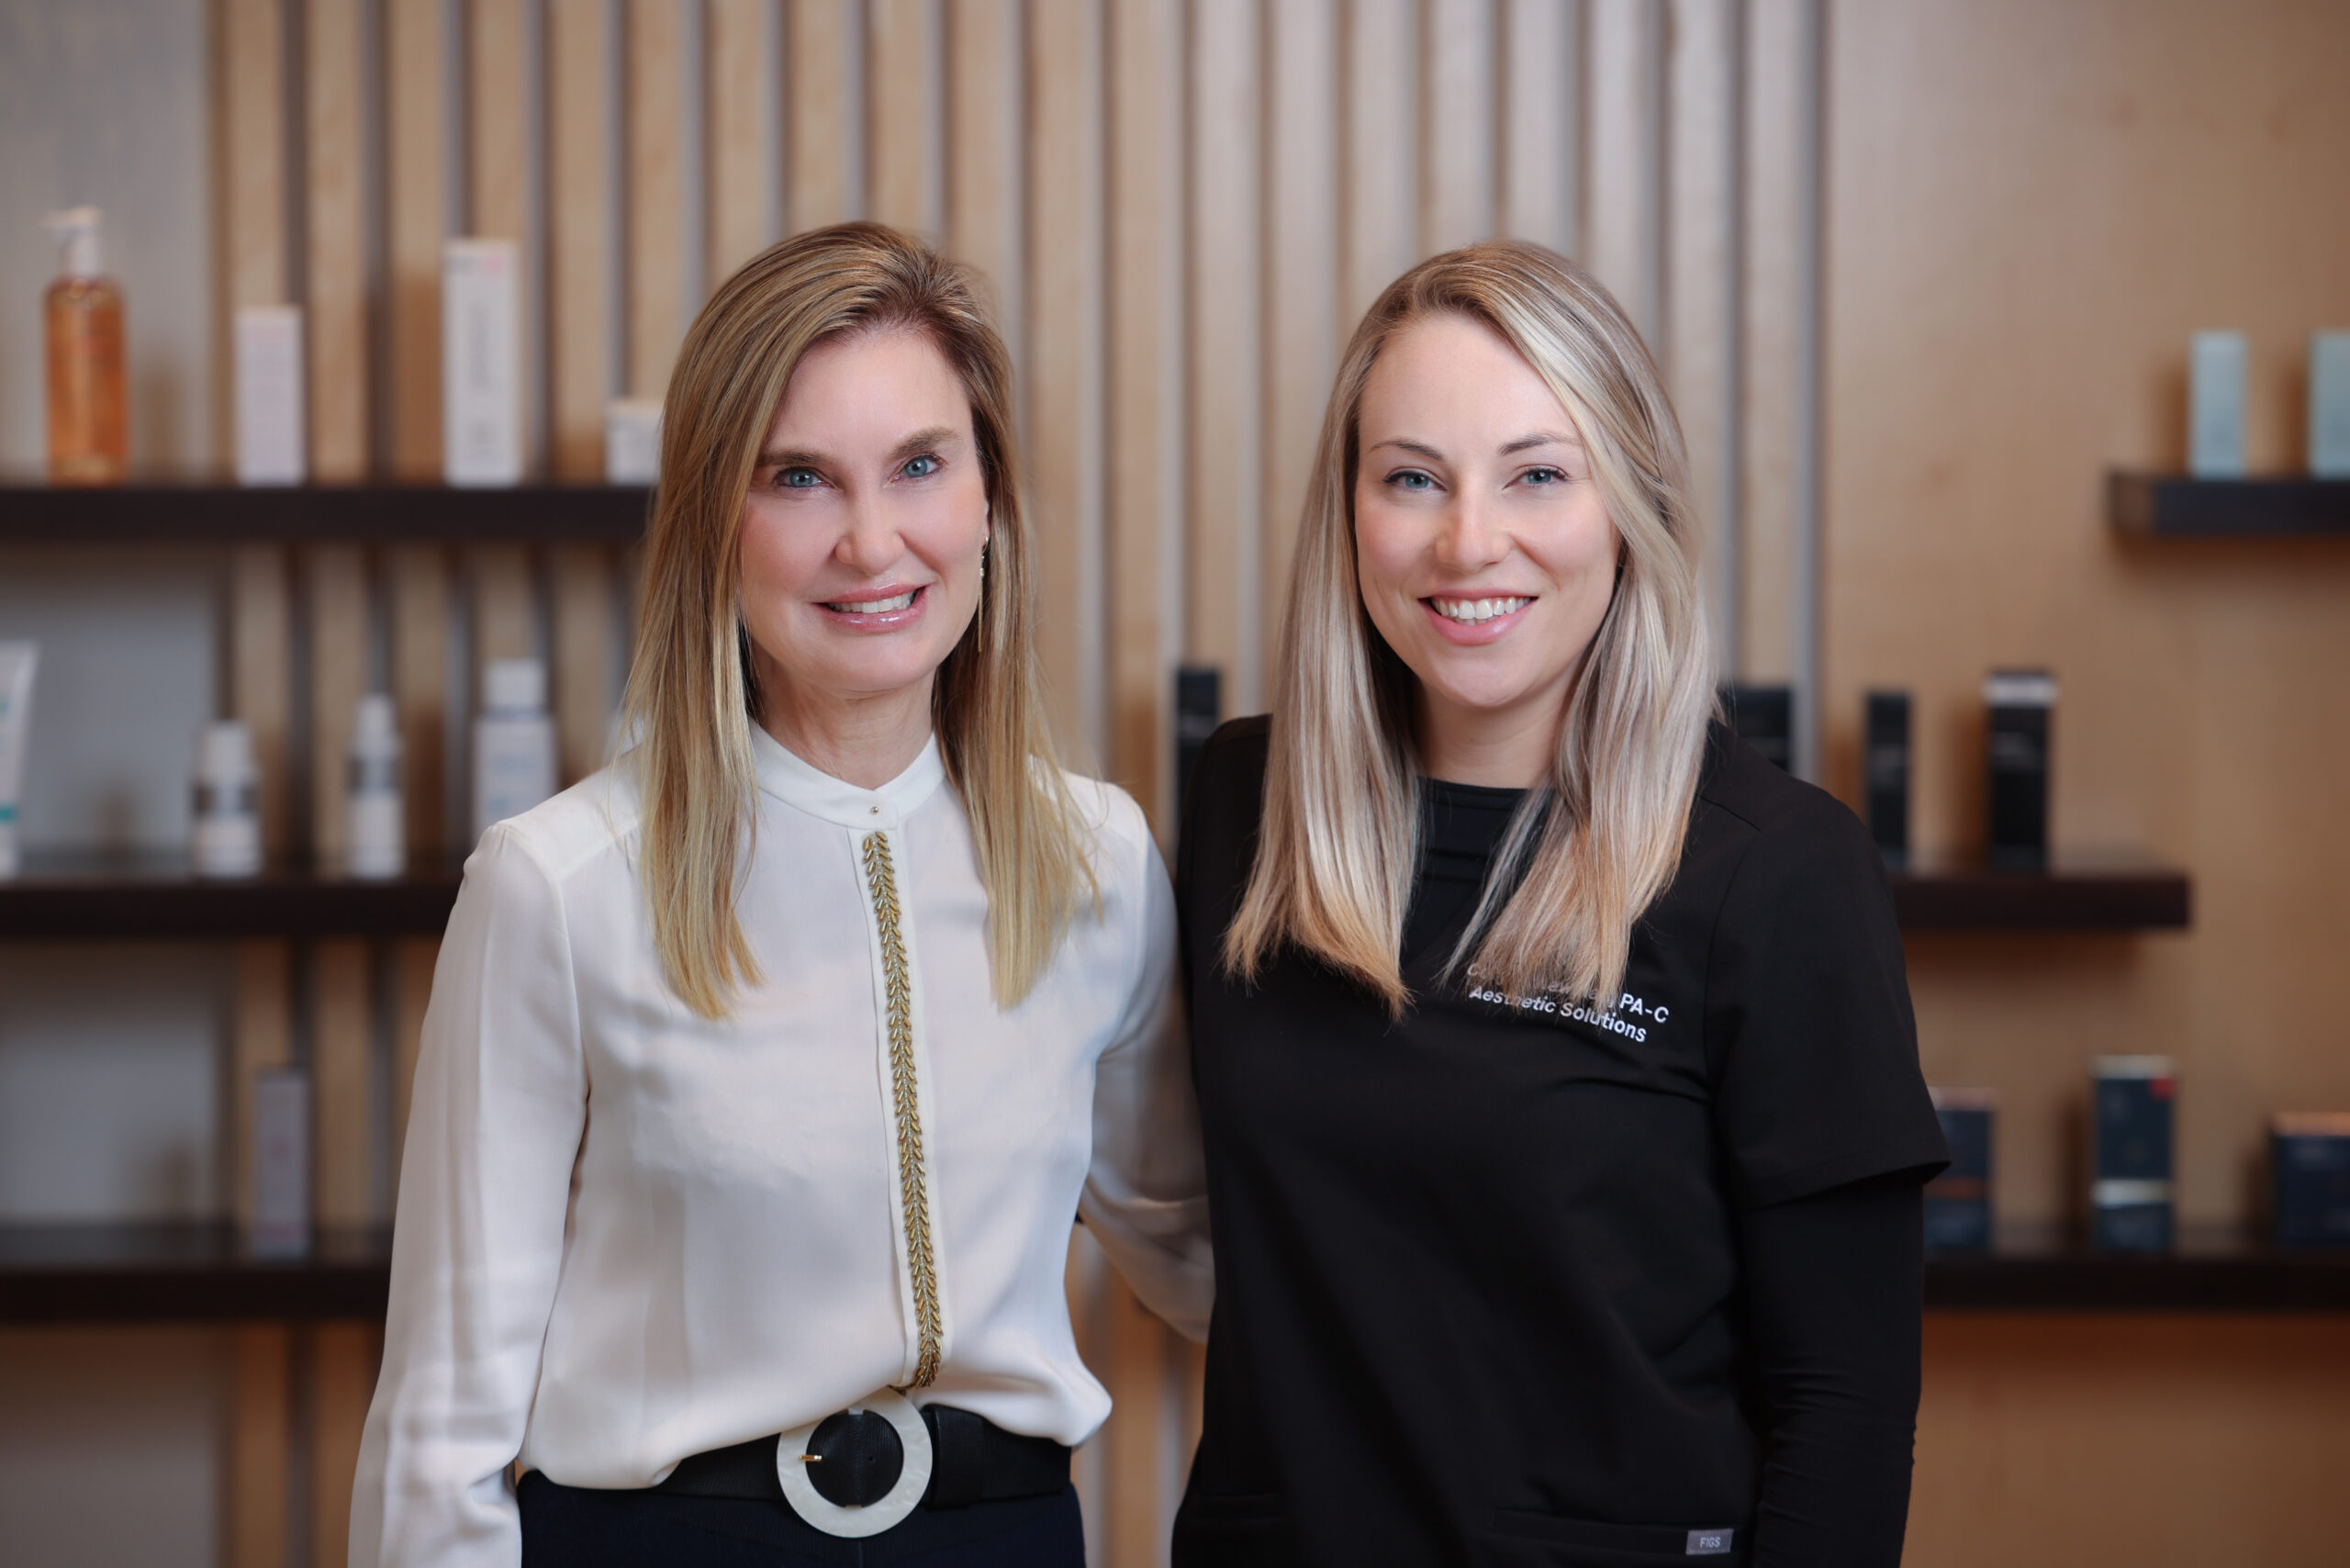 Dr. Cox and Corynn Newman provide PRP treatments for hair loss